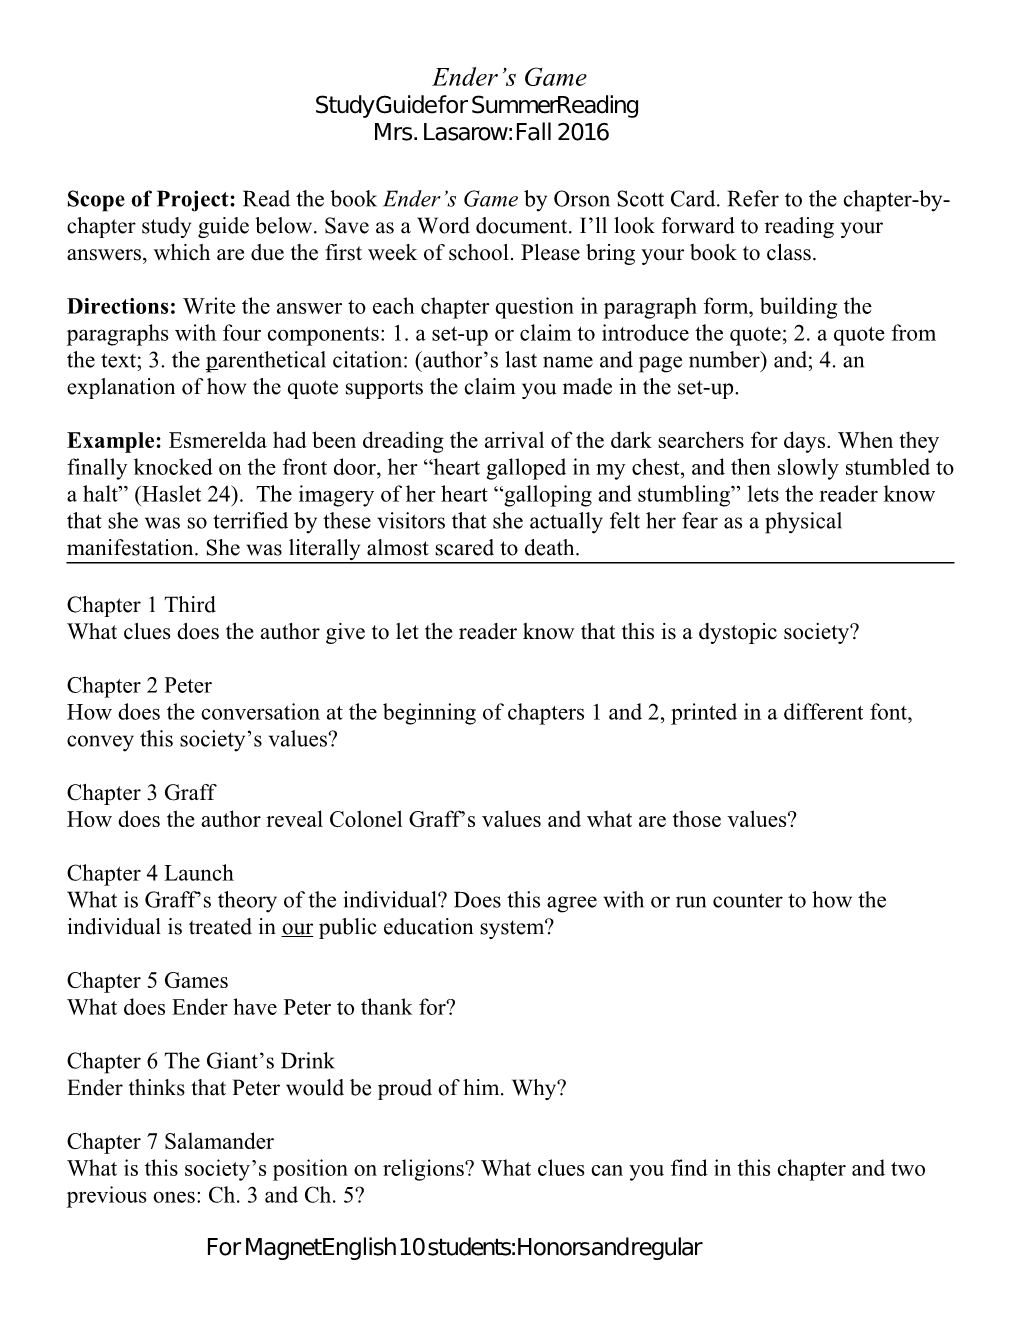 Ender S Game Study Guide for Summer Reading Assigned to Magnet English 10 Students Regular